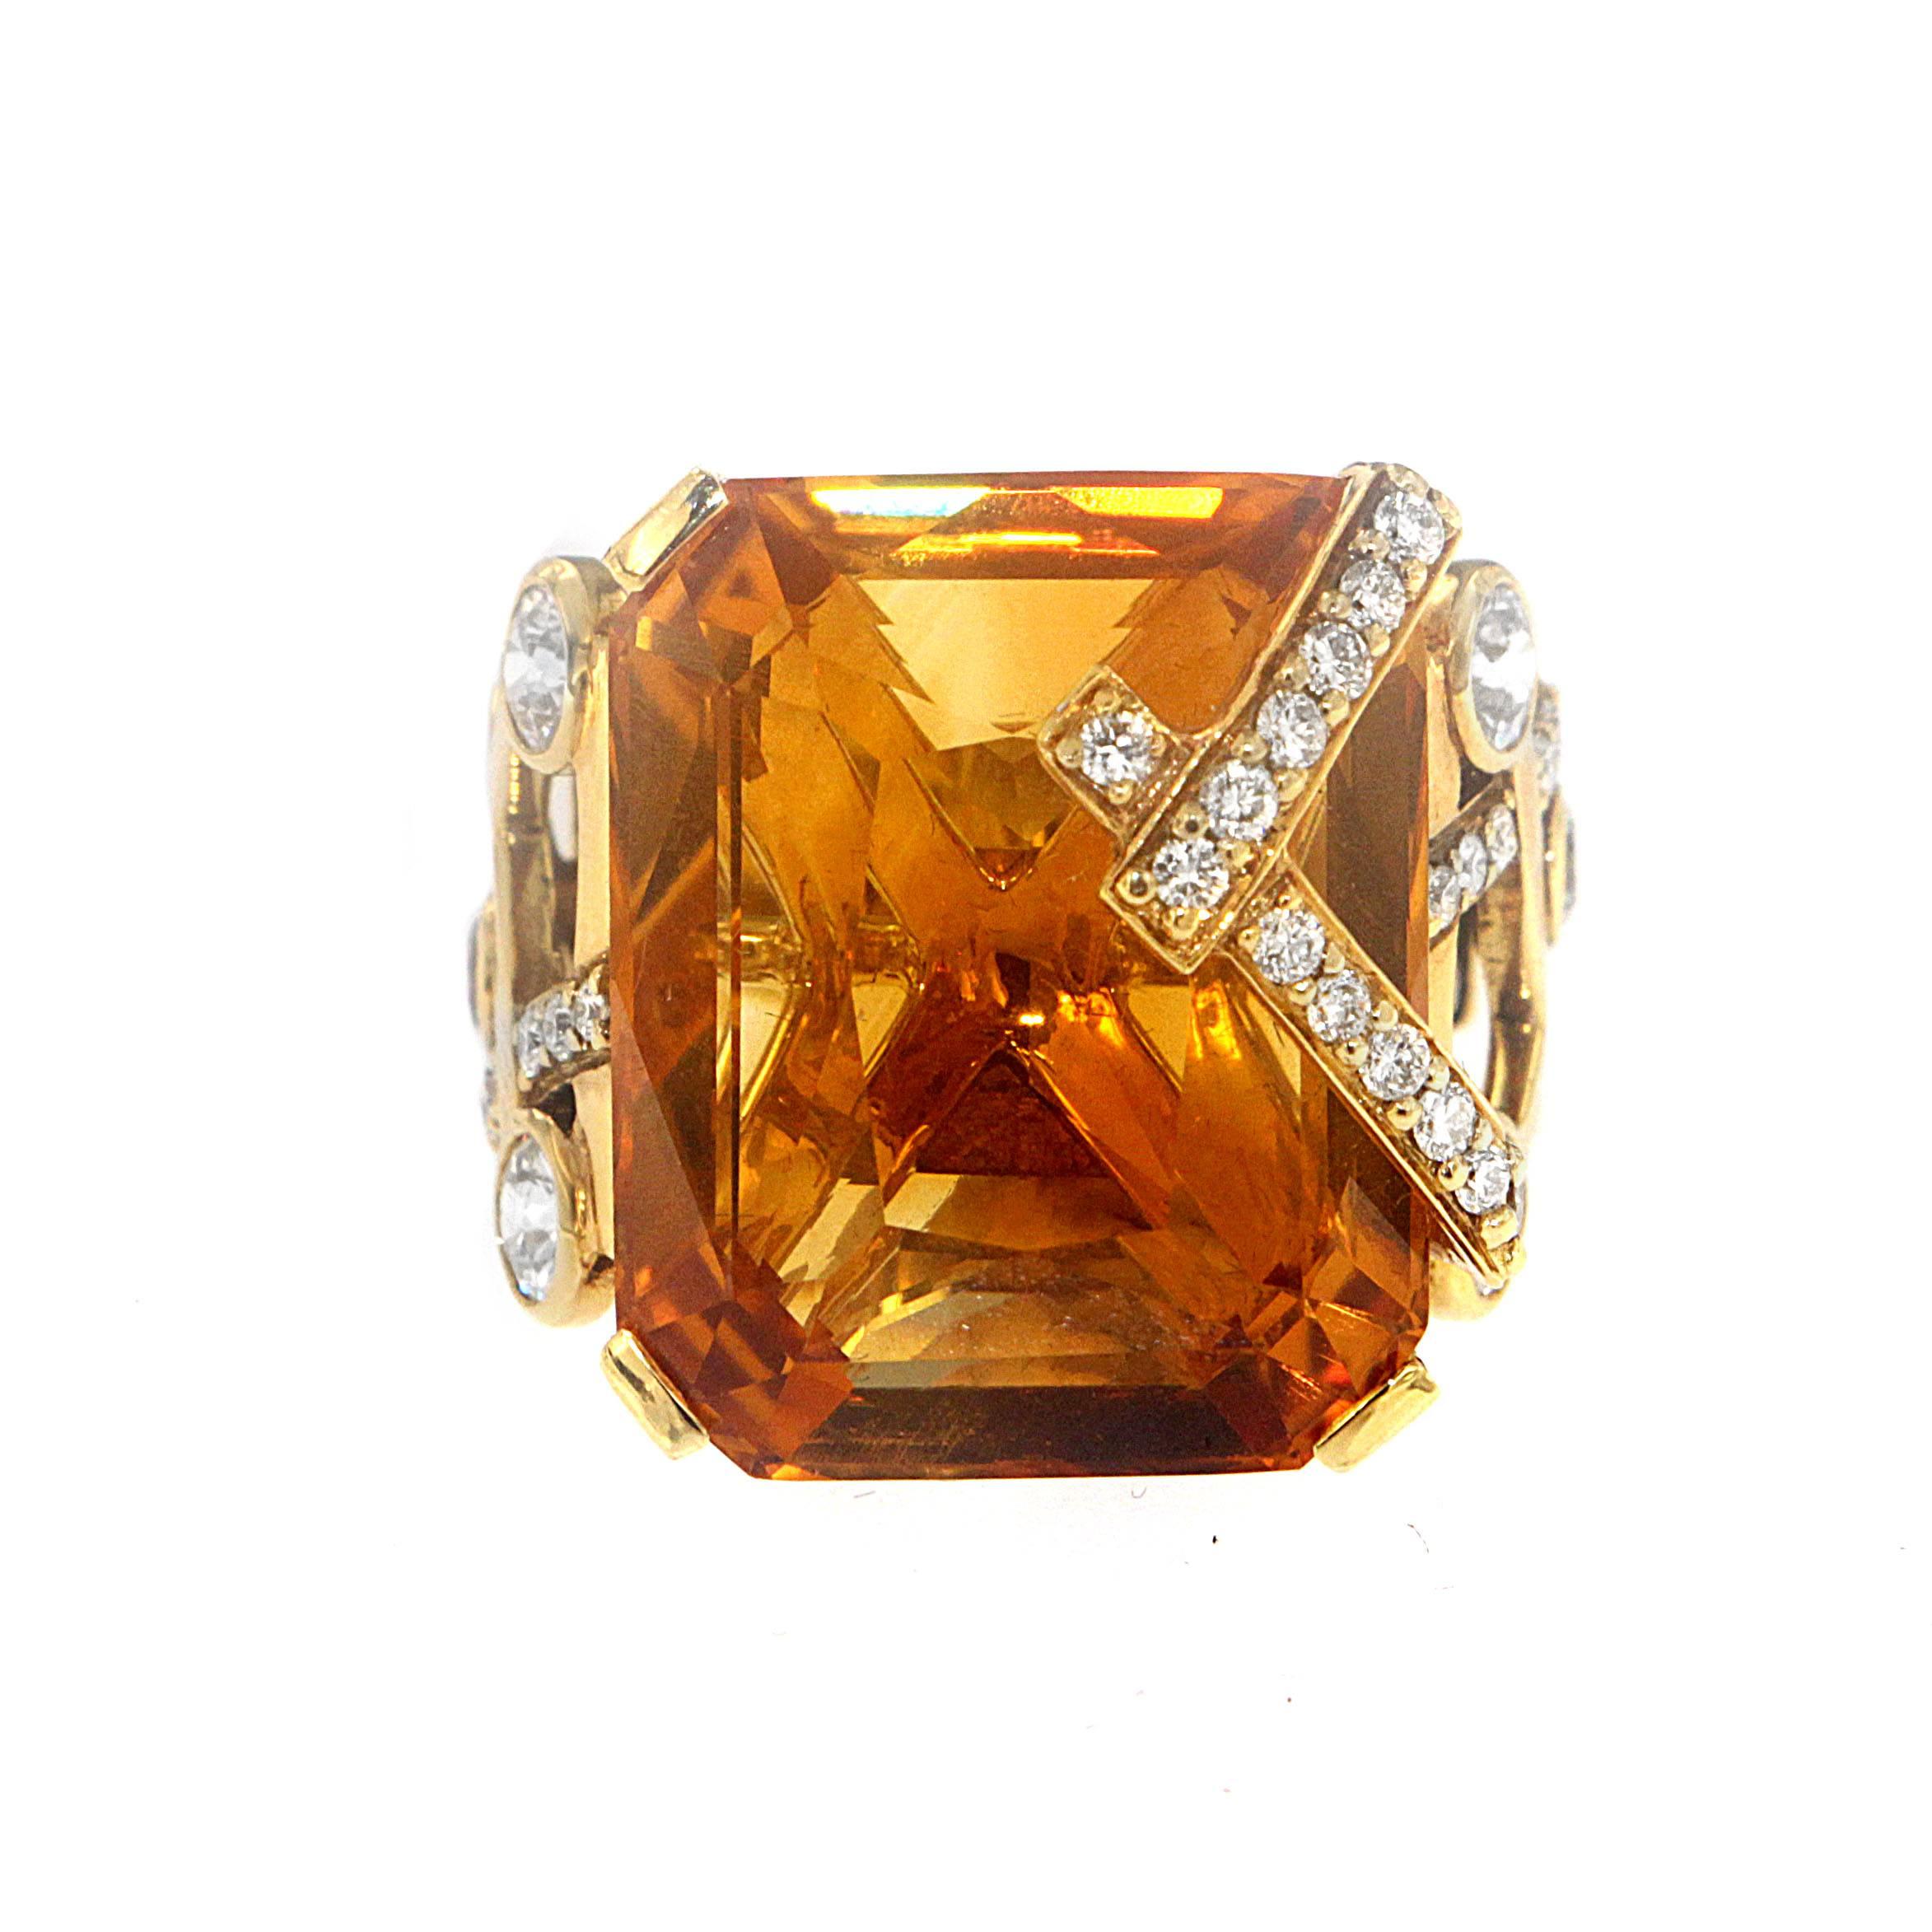 Transforming candy to carats, indulge in the Citrine Candy ring, a Zorab Creation.

Sure to satisfy the sweetest tooth, this fine jewelry confection features 26.30 carats of tempting citrine sprinkled with diamond sugar 0.40 carats and dripping in